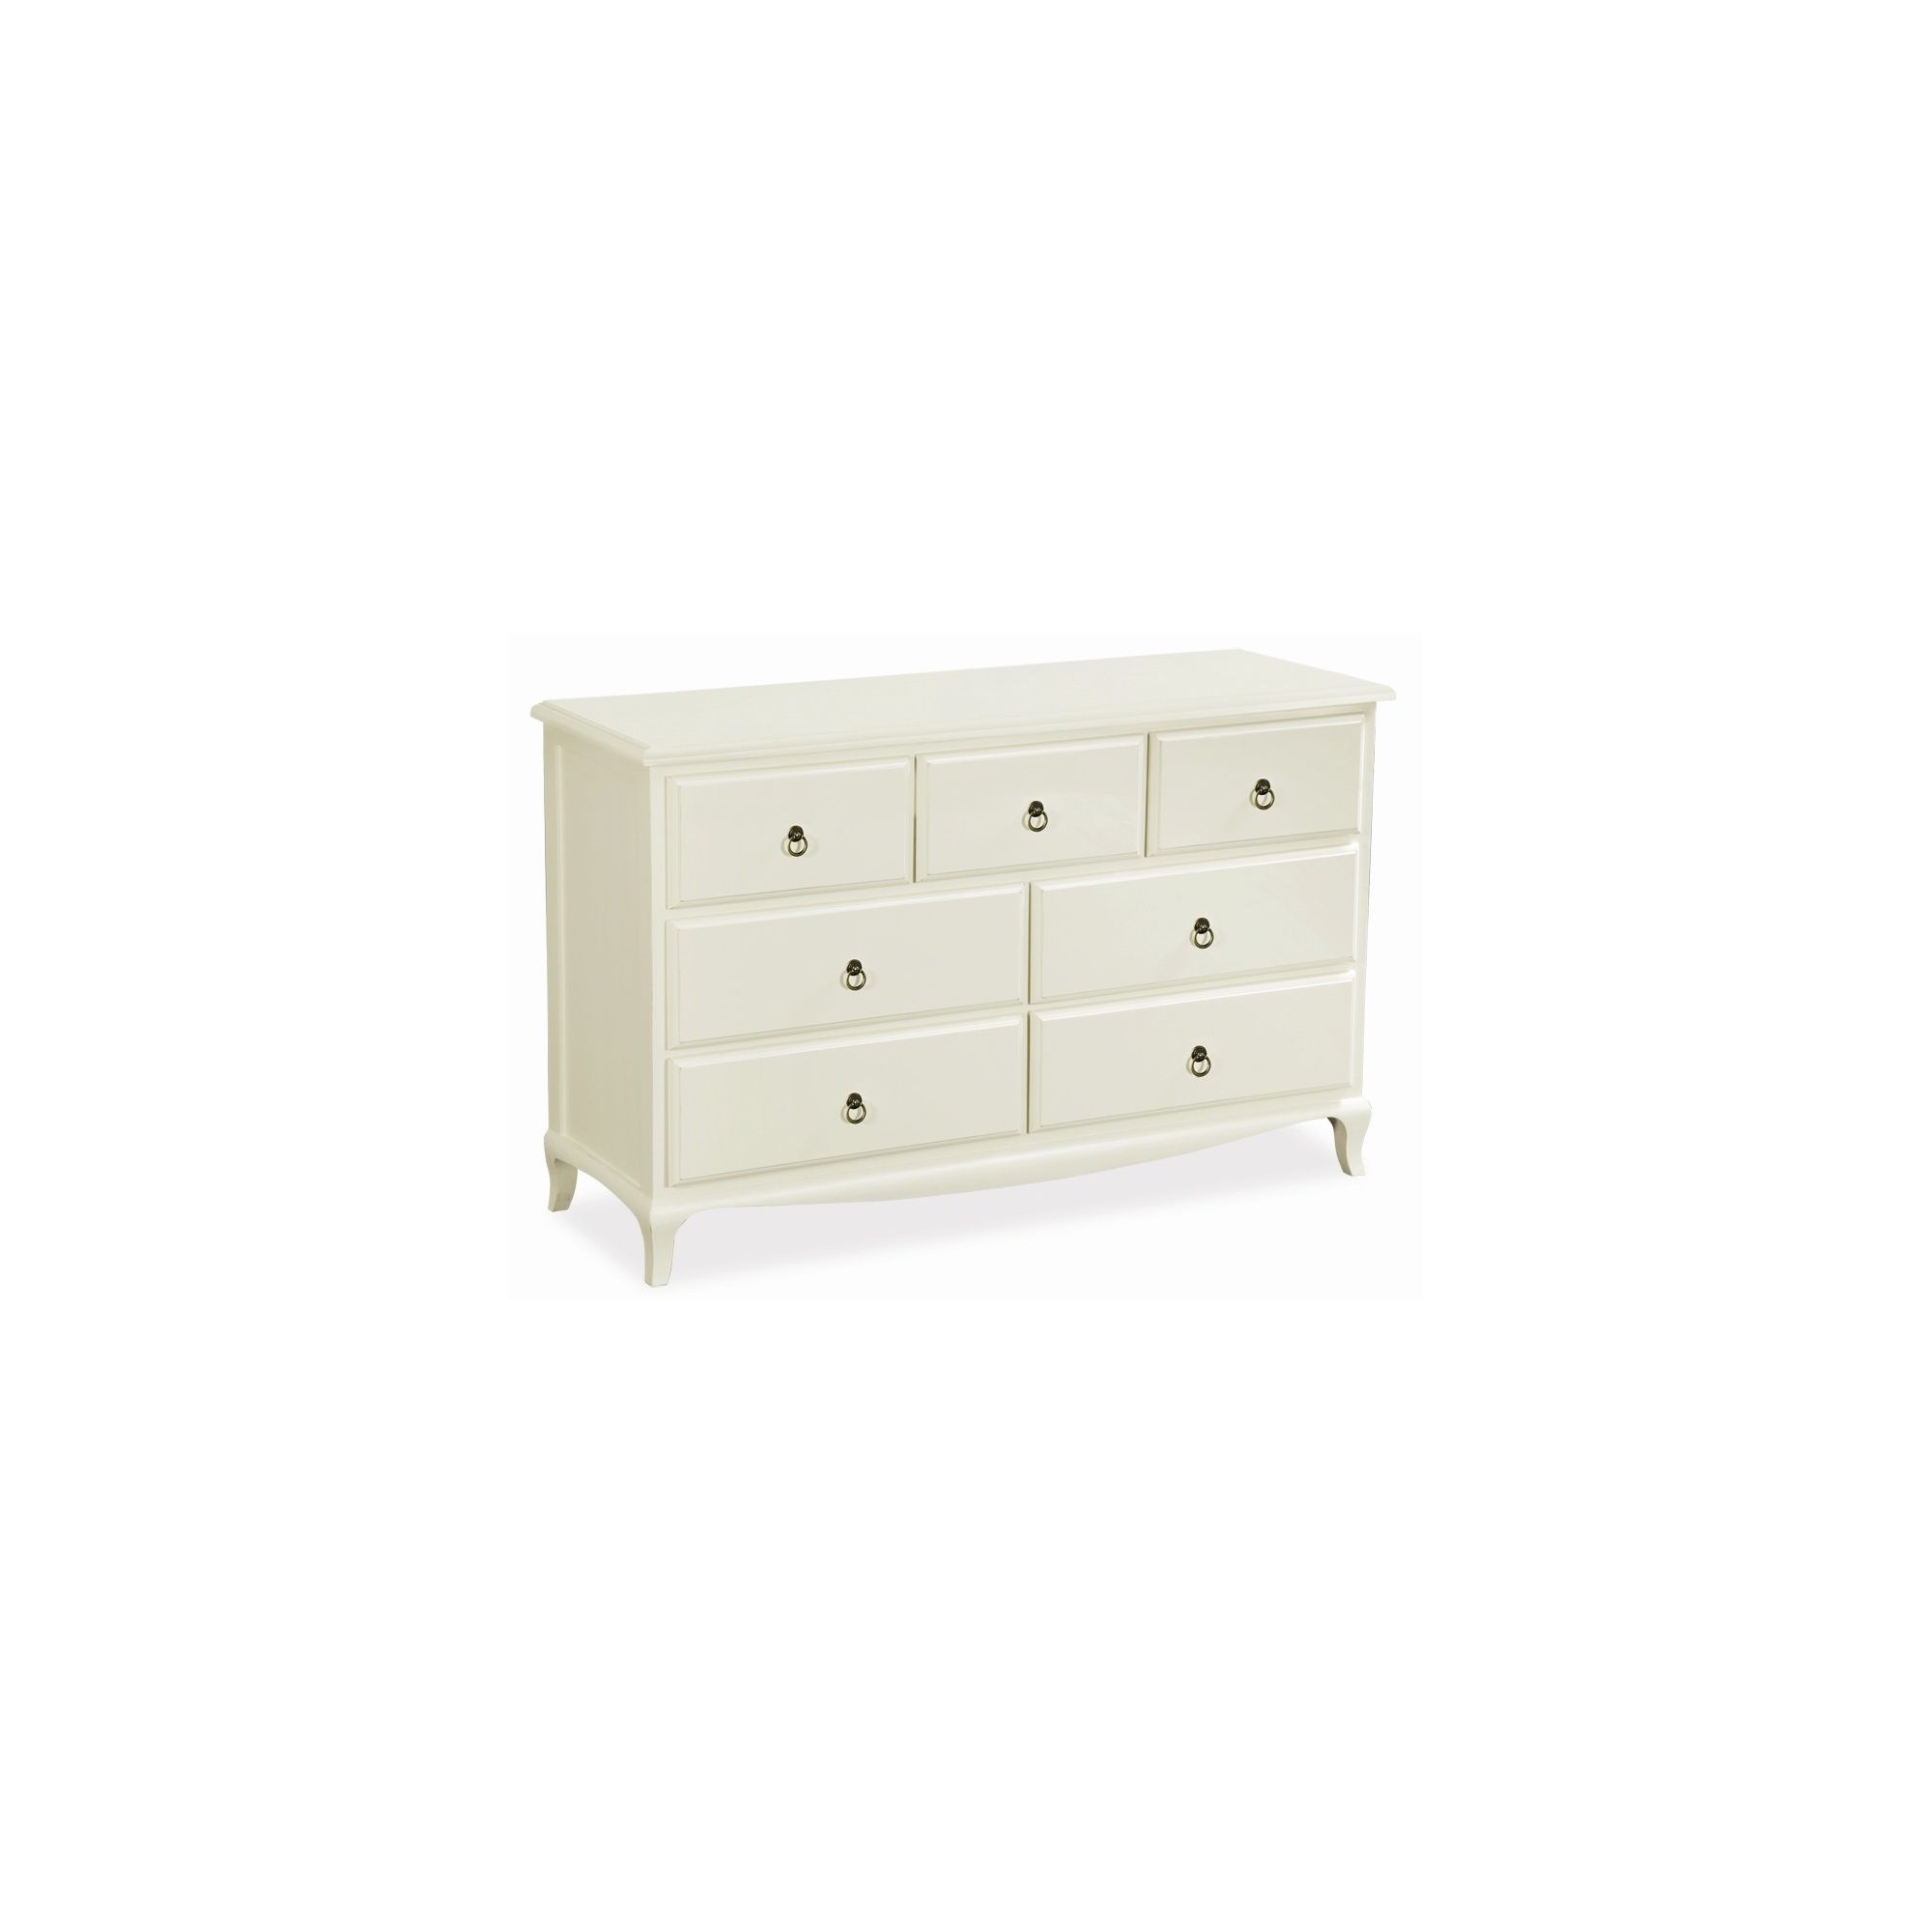 Alterton Furniture Normandy 4 Drawer Chest at Tescos Direct